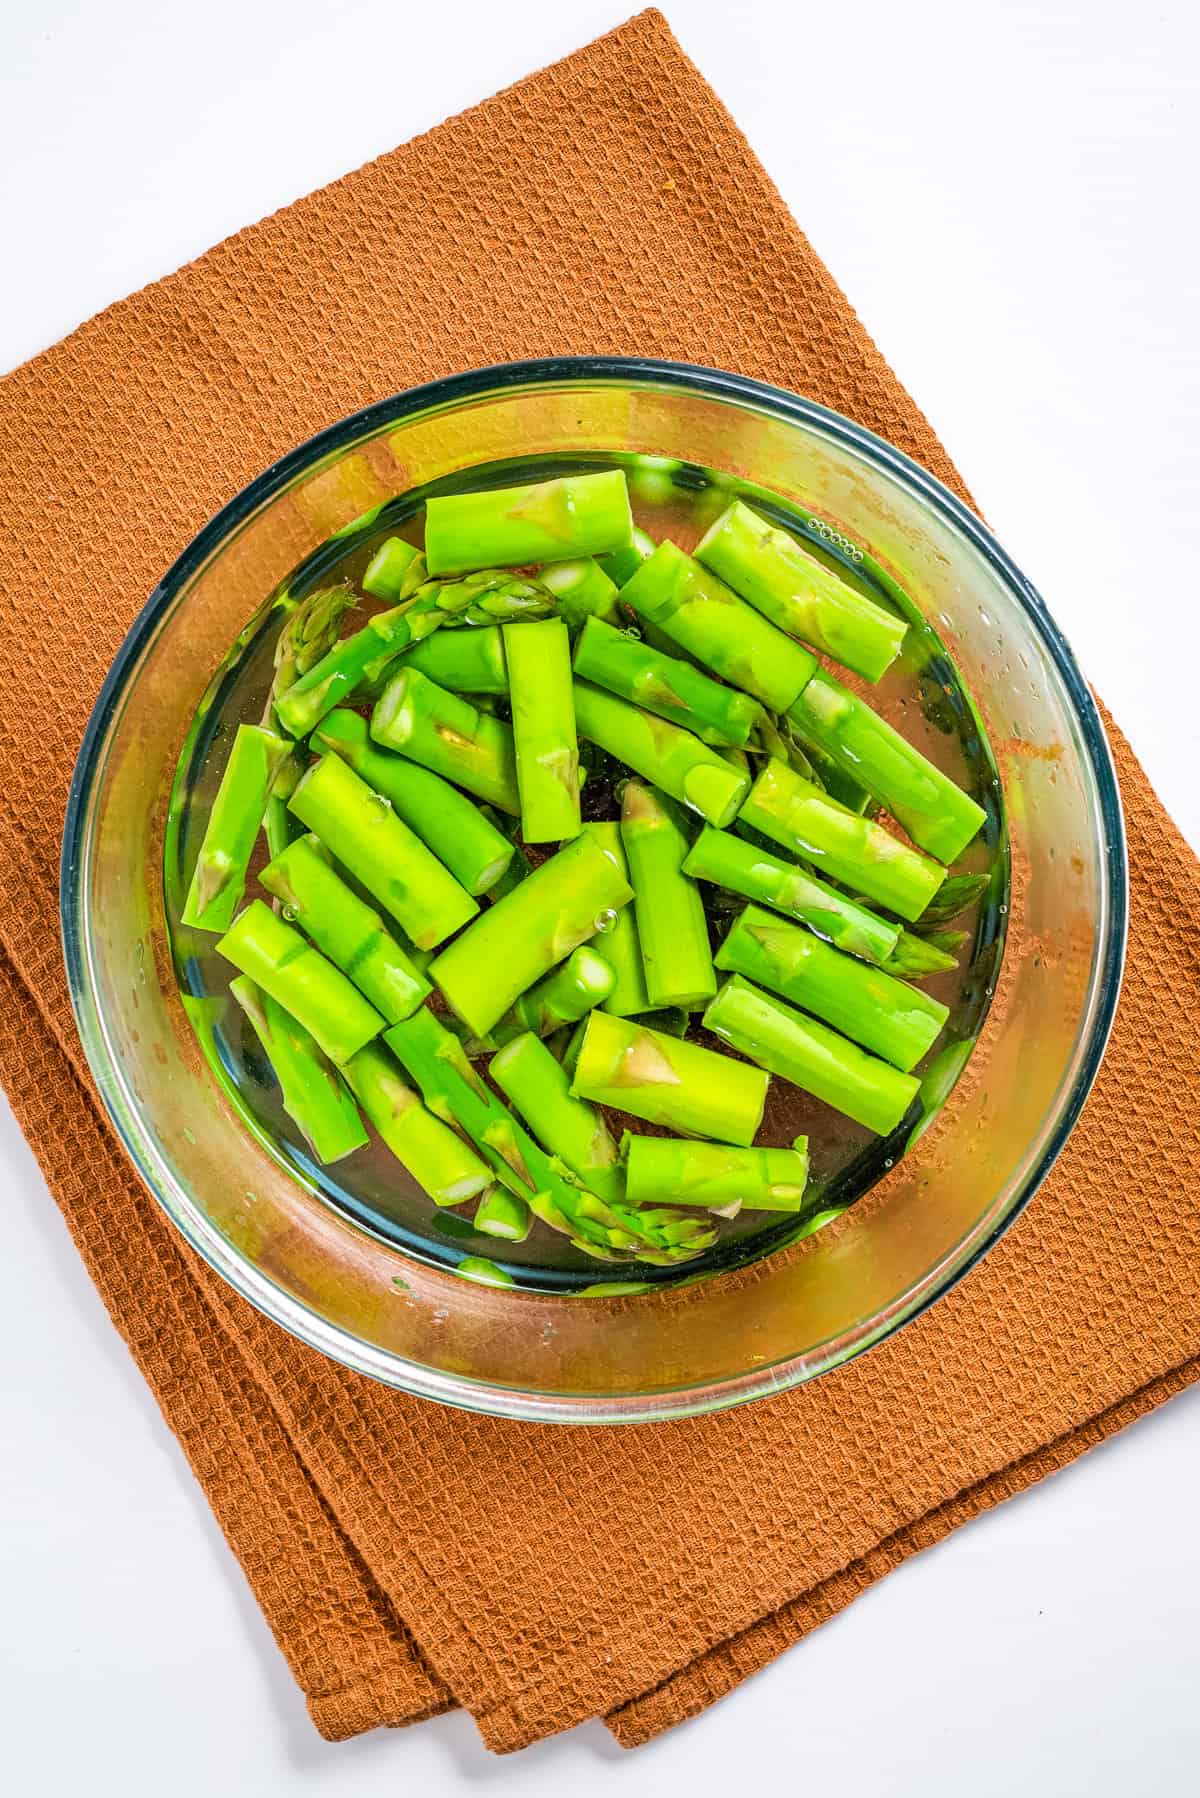 Overhead view of boiled asparagus in a glass bowl.